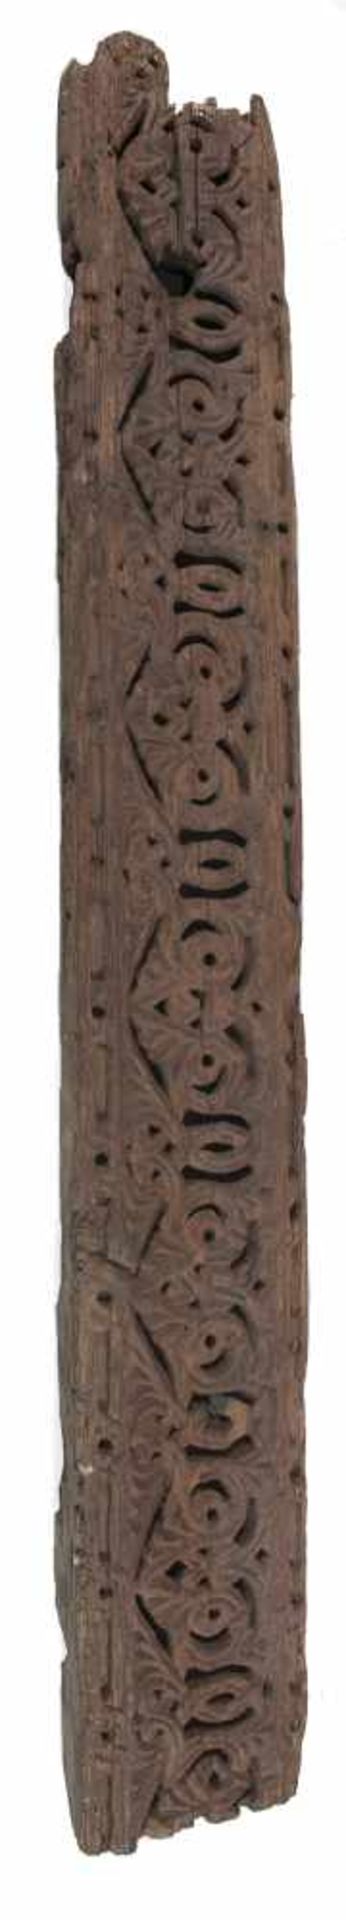 Lot of three carved wooden beams. 17th – 18th century. 115 x 16 x 8 cm., 112 x 19 x 12 cm, and 220 x - Image 4 of 6